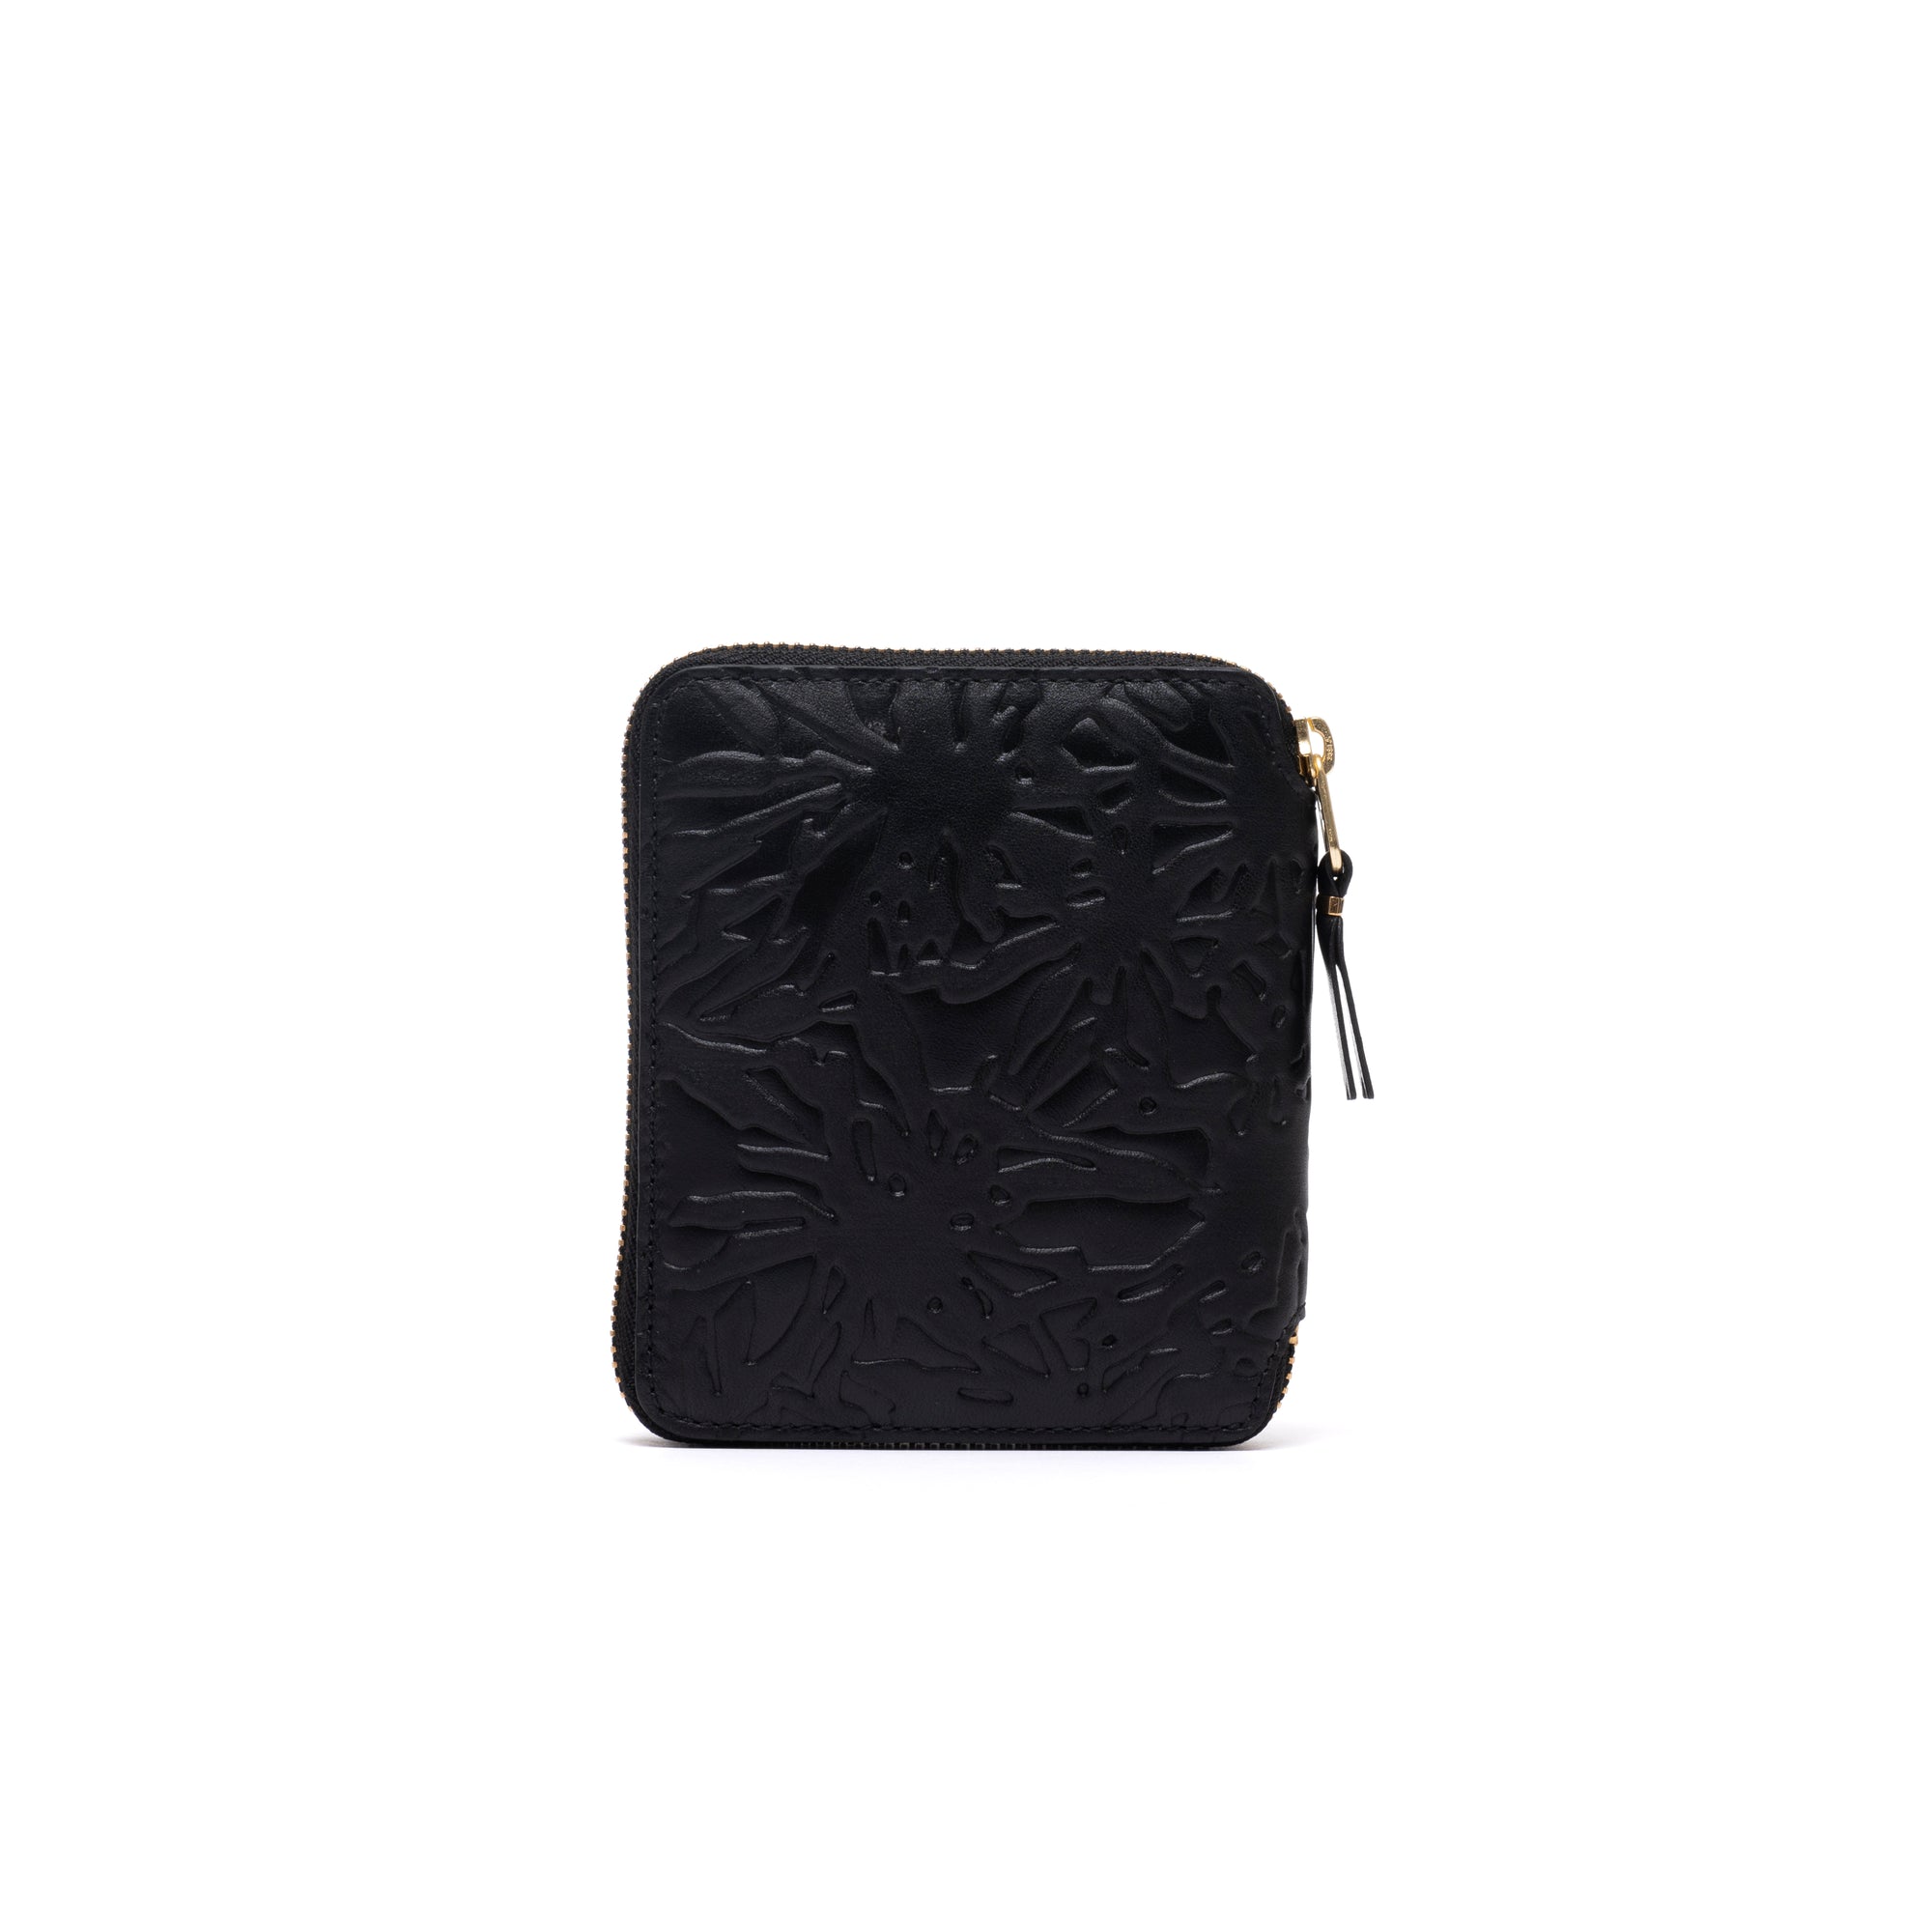 CDG WALLET - Embossed Forest - (SA2100EF Black) view 2